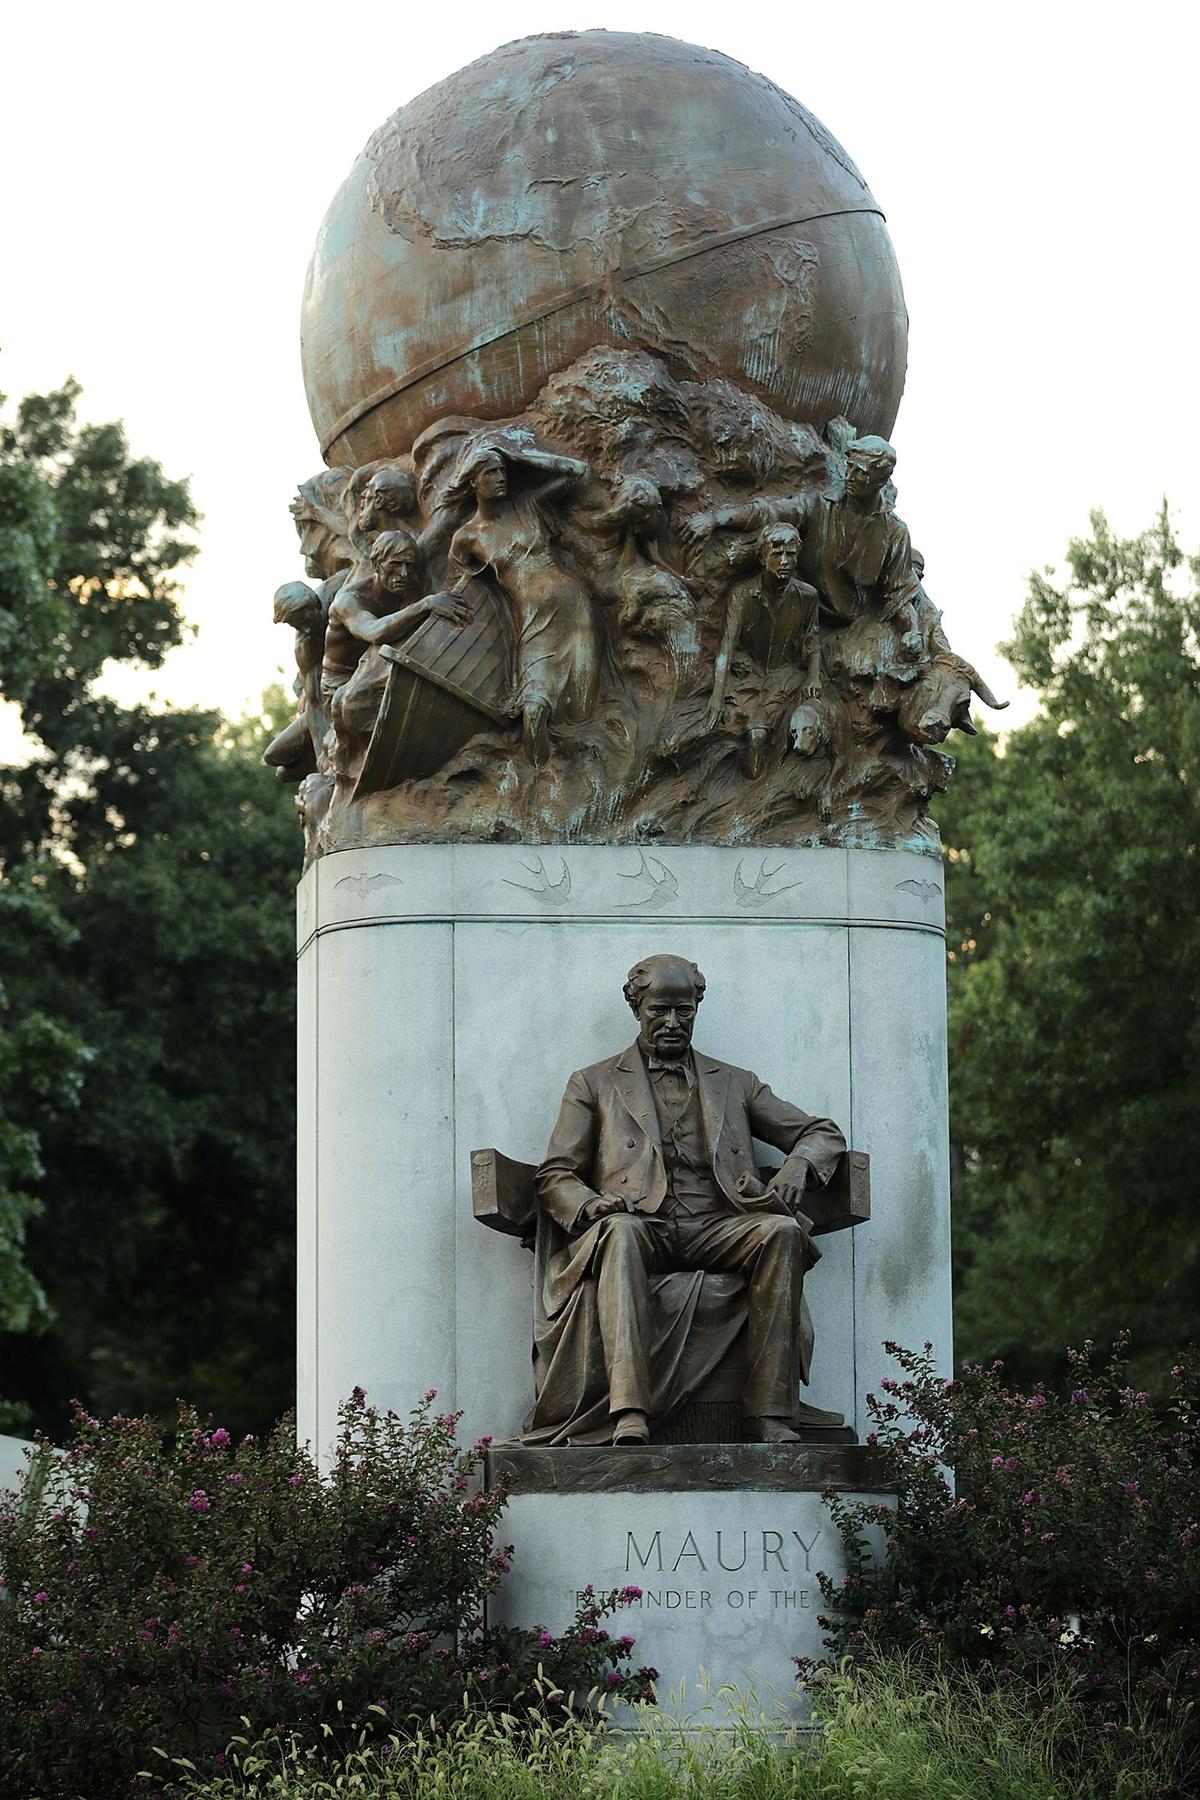 Statue of Captain Matthew Fontaine Maury, the "pathfinder of the seas," in Richmond, Virginia. (Chip Somodevilla/Getty Images)